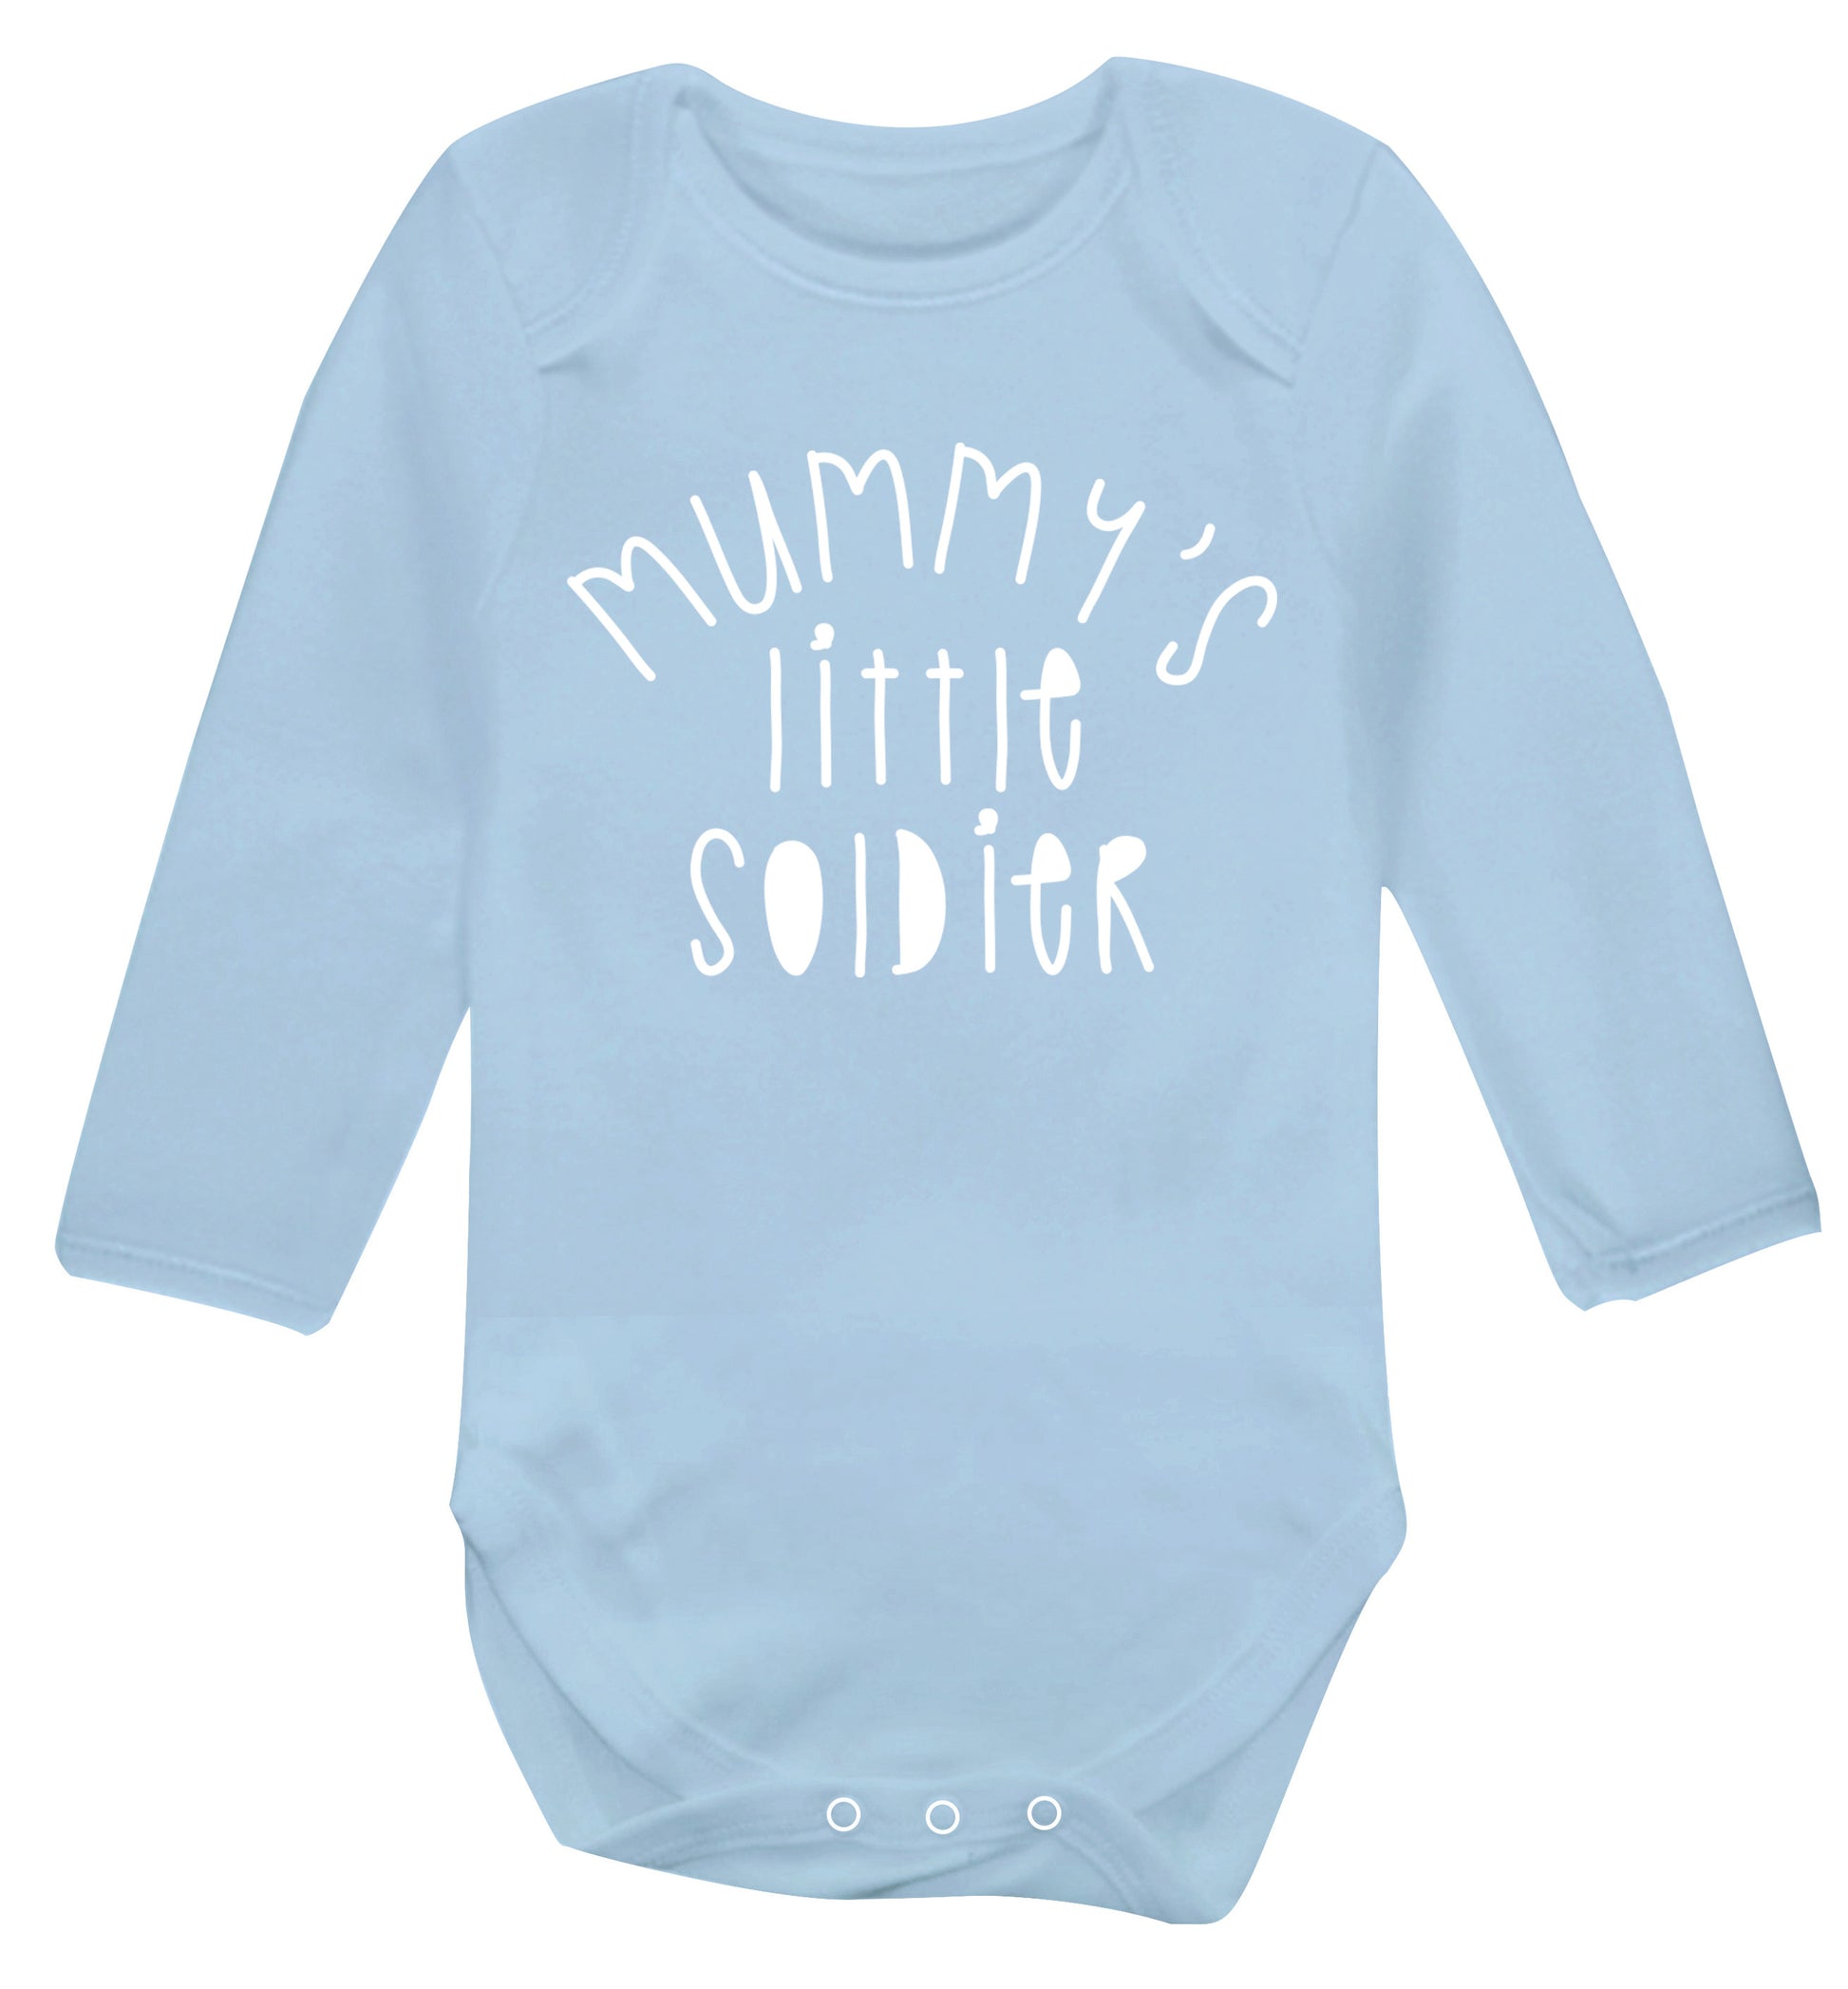 Mummy's little soldier Baby Vest long sleeved pale blue 6-12 months